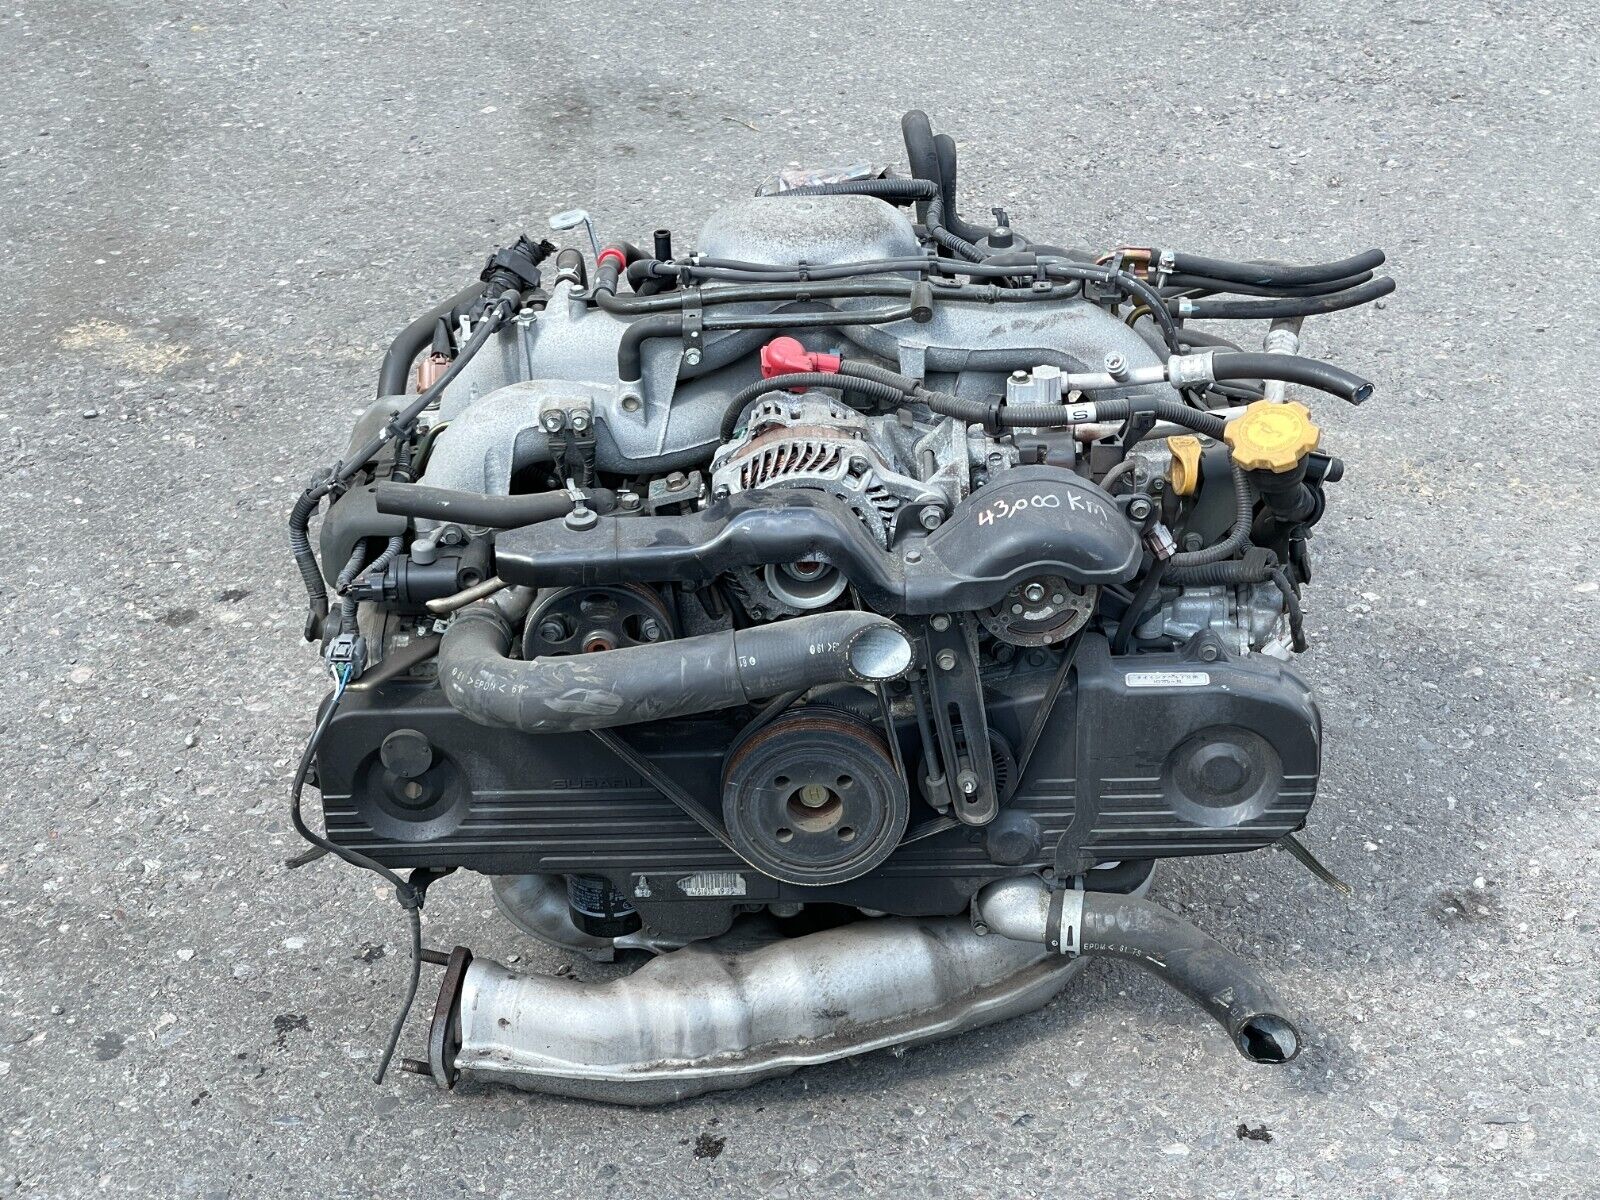 Subaru Impreza 2.5 liter engines WITHOUT Variable Cam 2000 to 2005